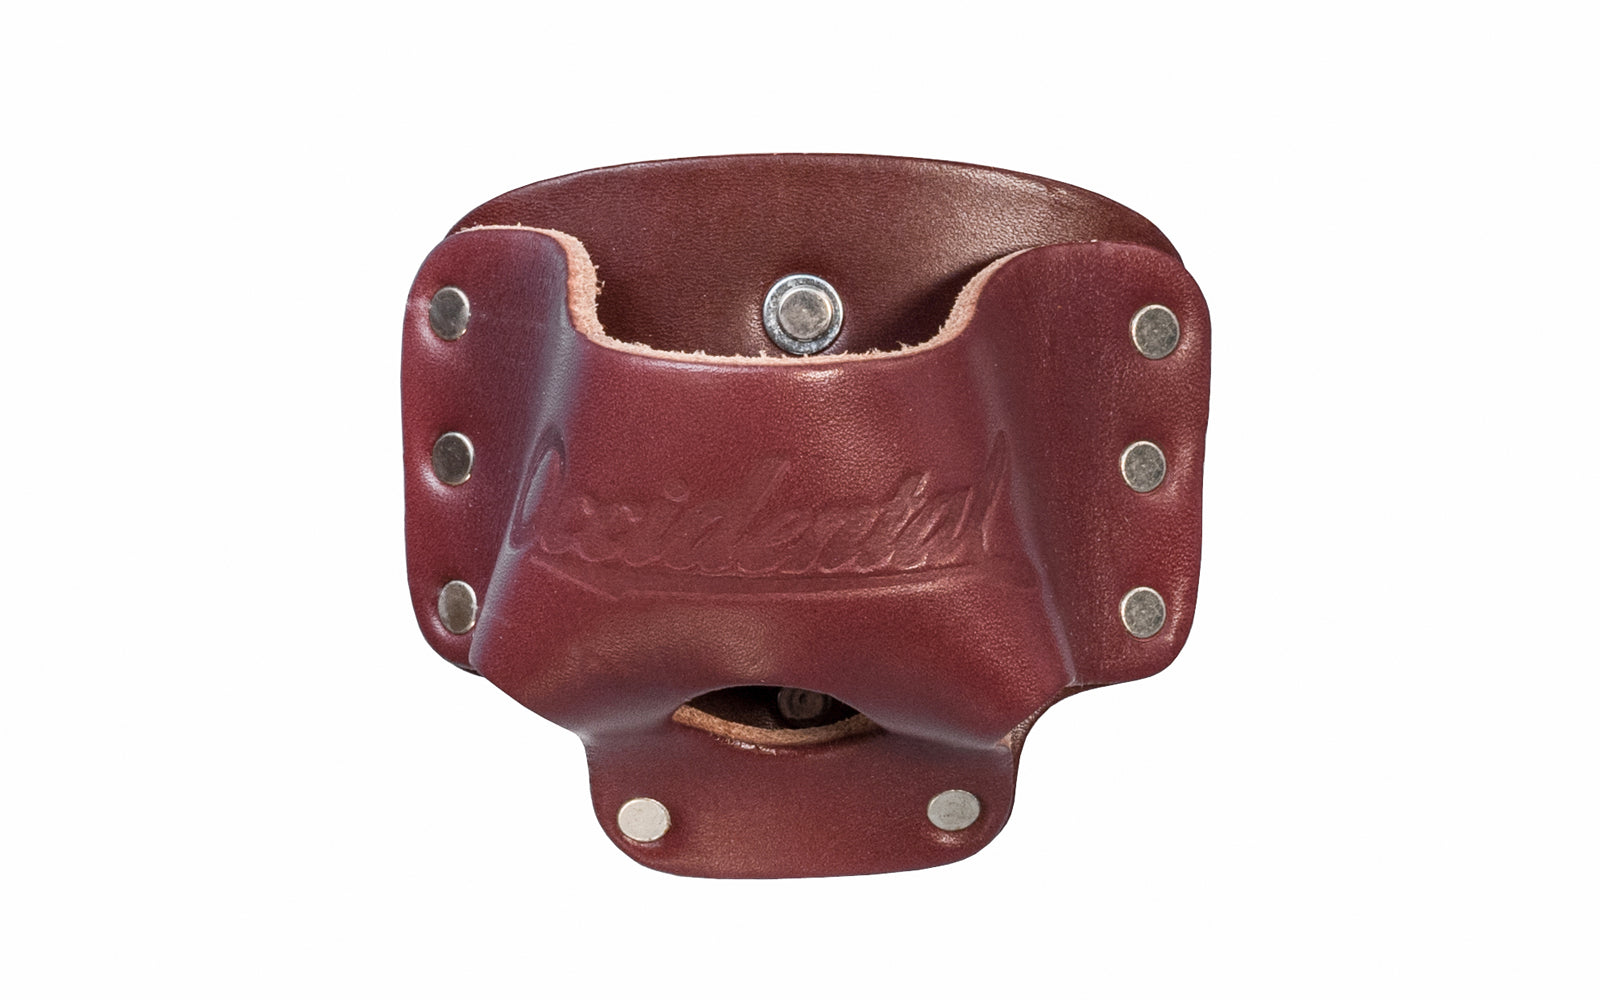 Made in USA - Model No. 5042 - Occidental Leather clip-on tape holster that fits medium body tapes (up to 25') excluding 